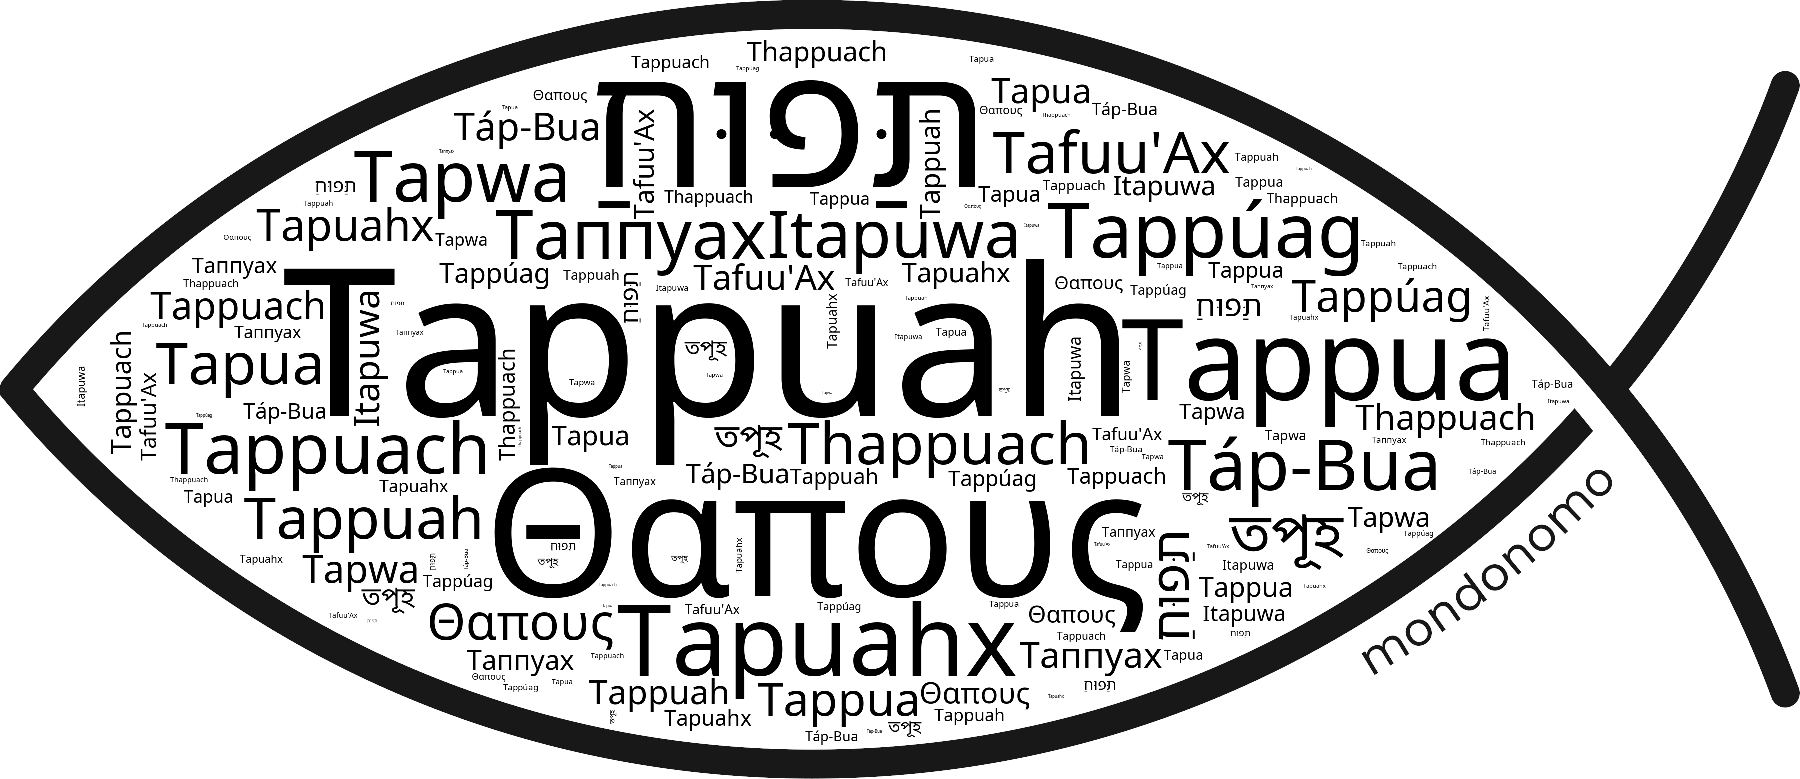 Name Tappuah in the world's Bibles